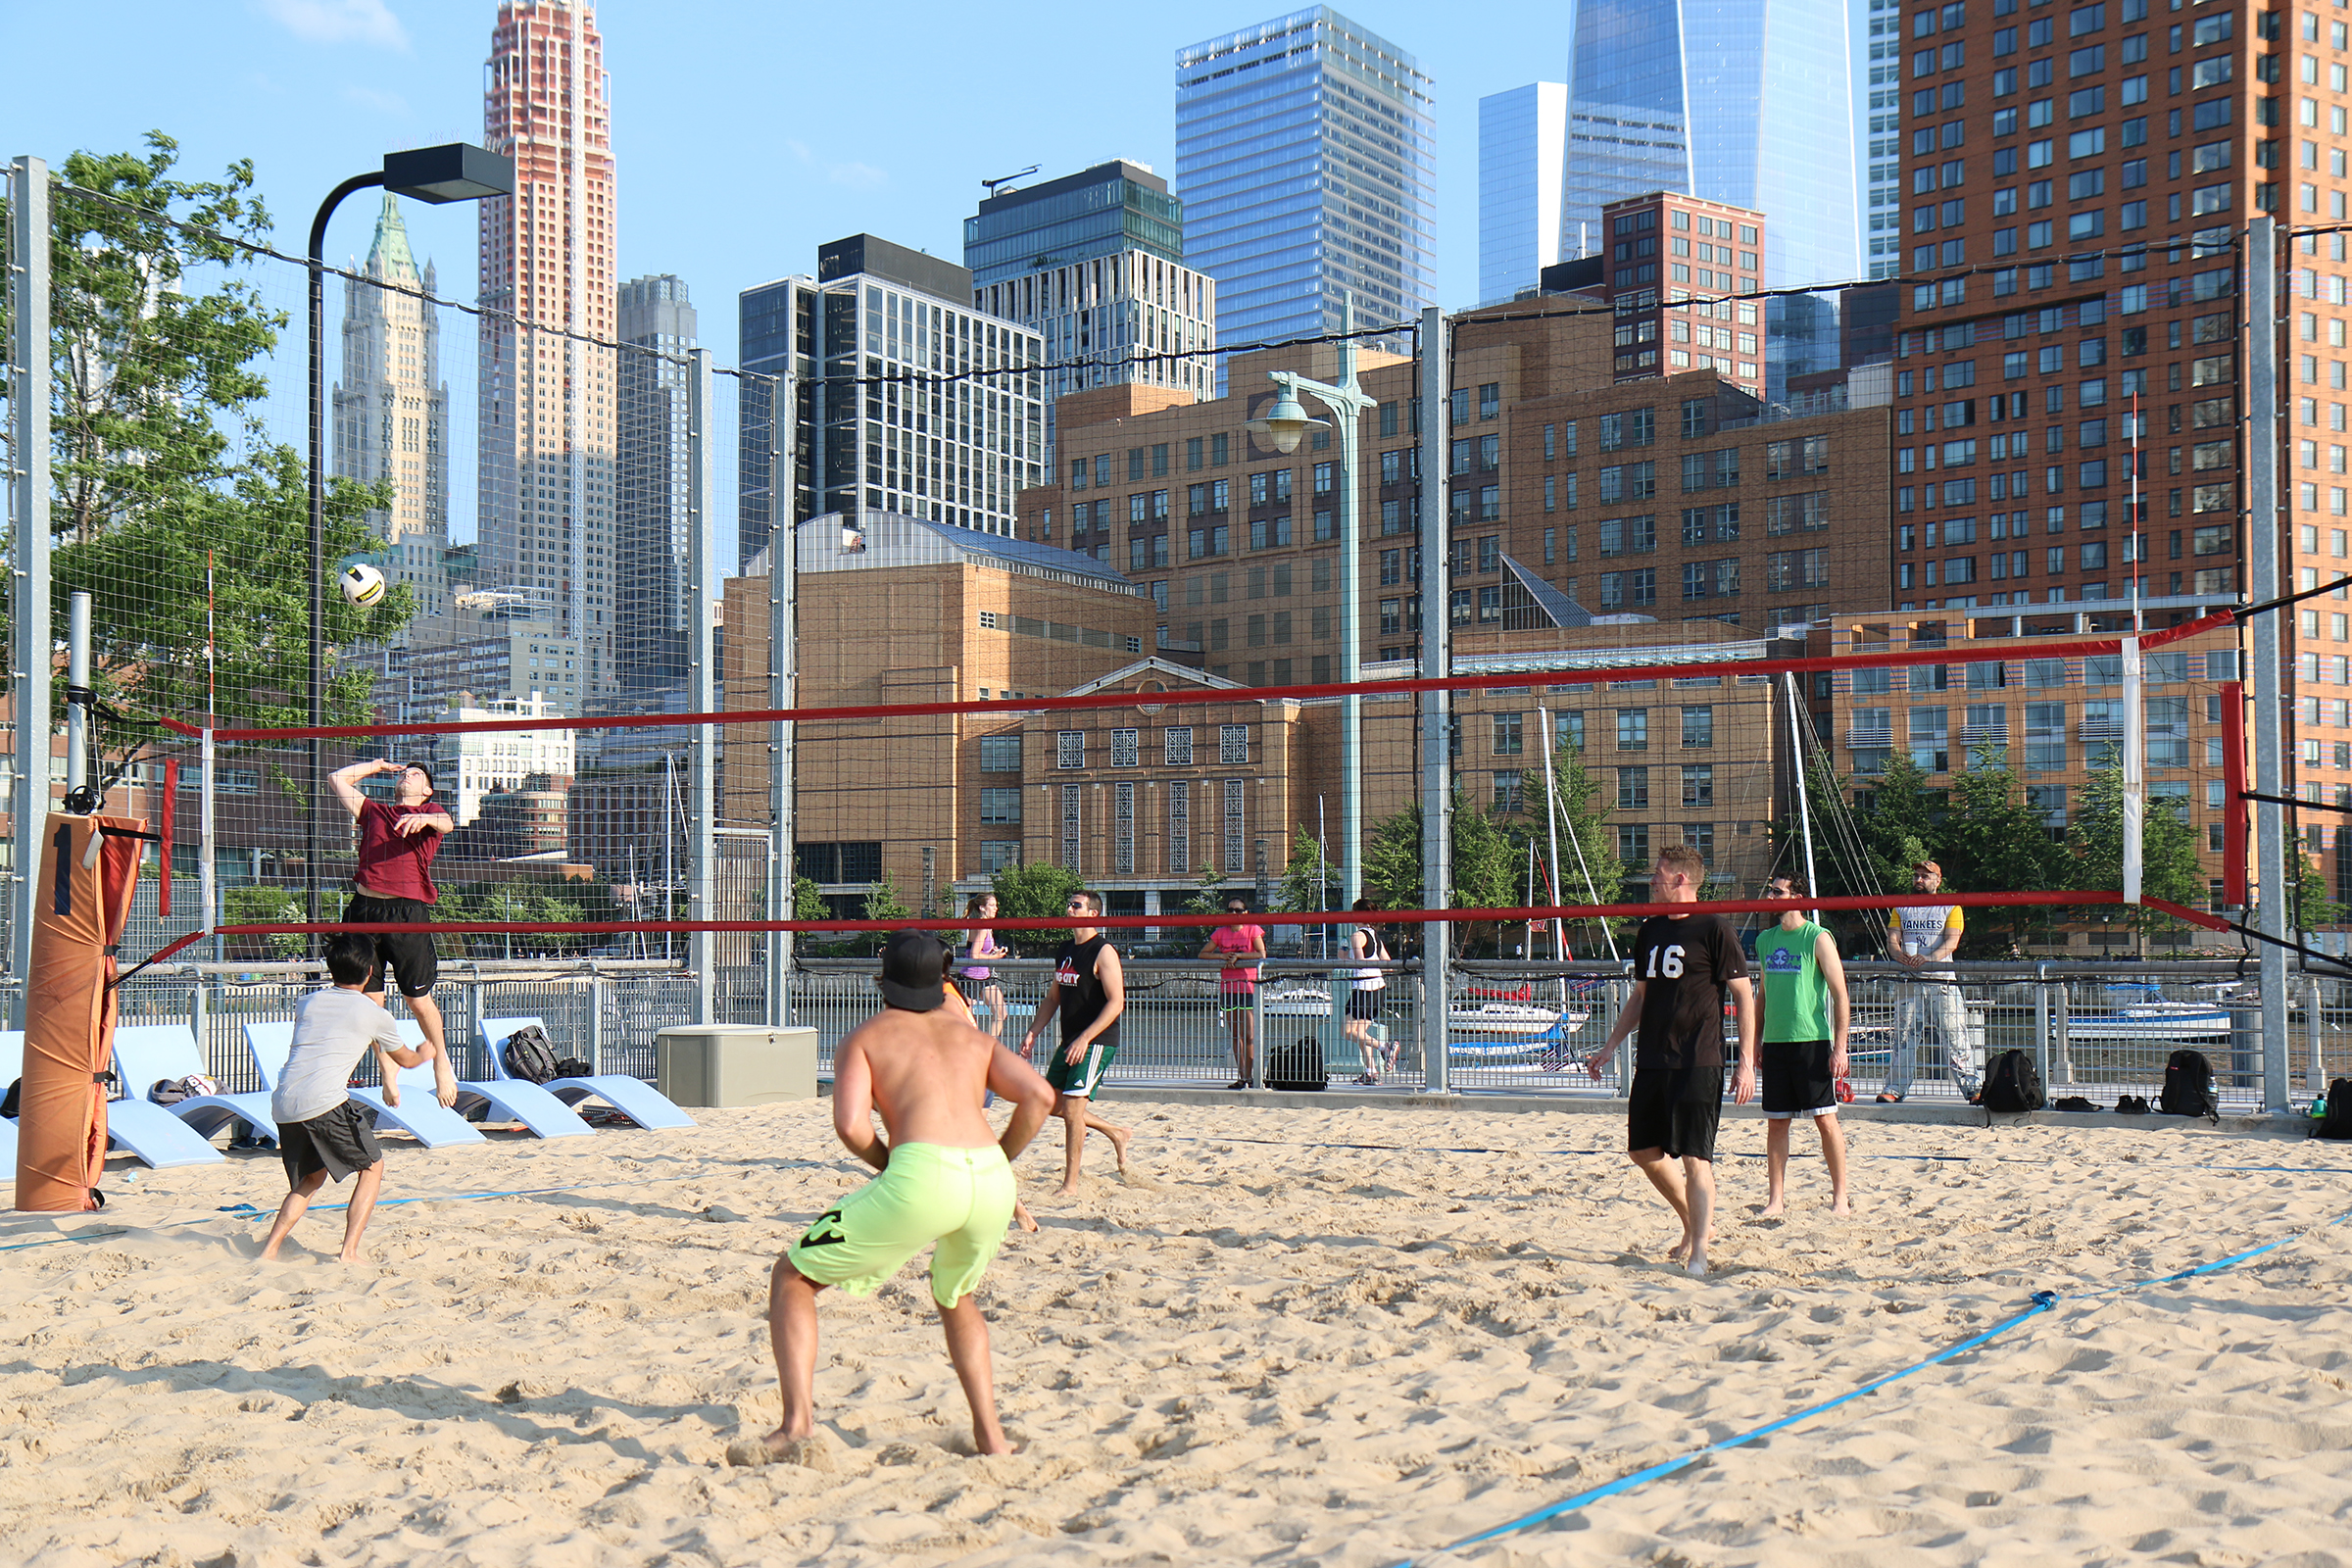 Beach volleyball players ready for the ball coming over the net at Hudson River Park's Pier 25